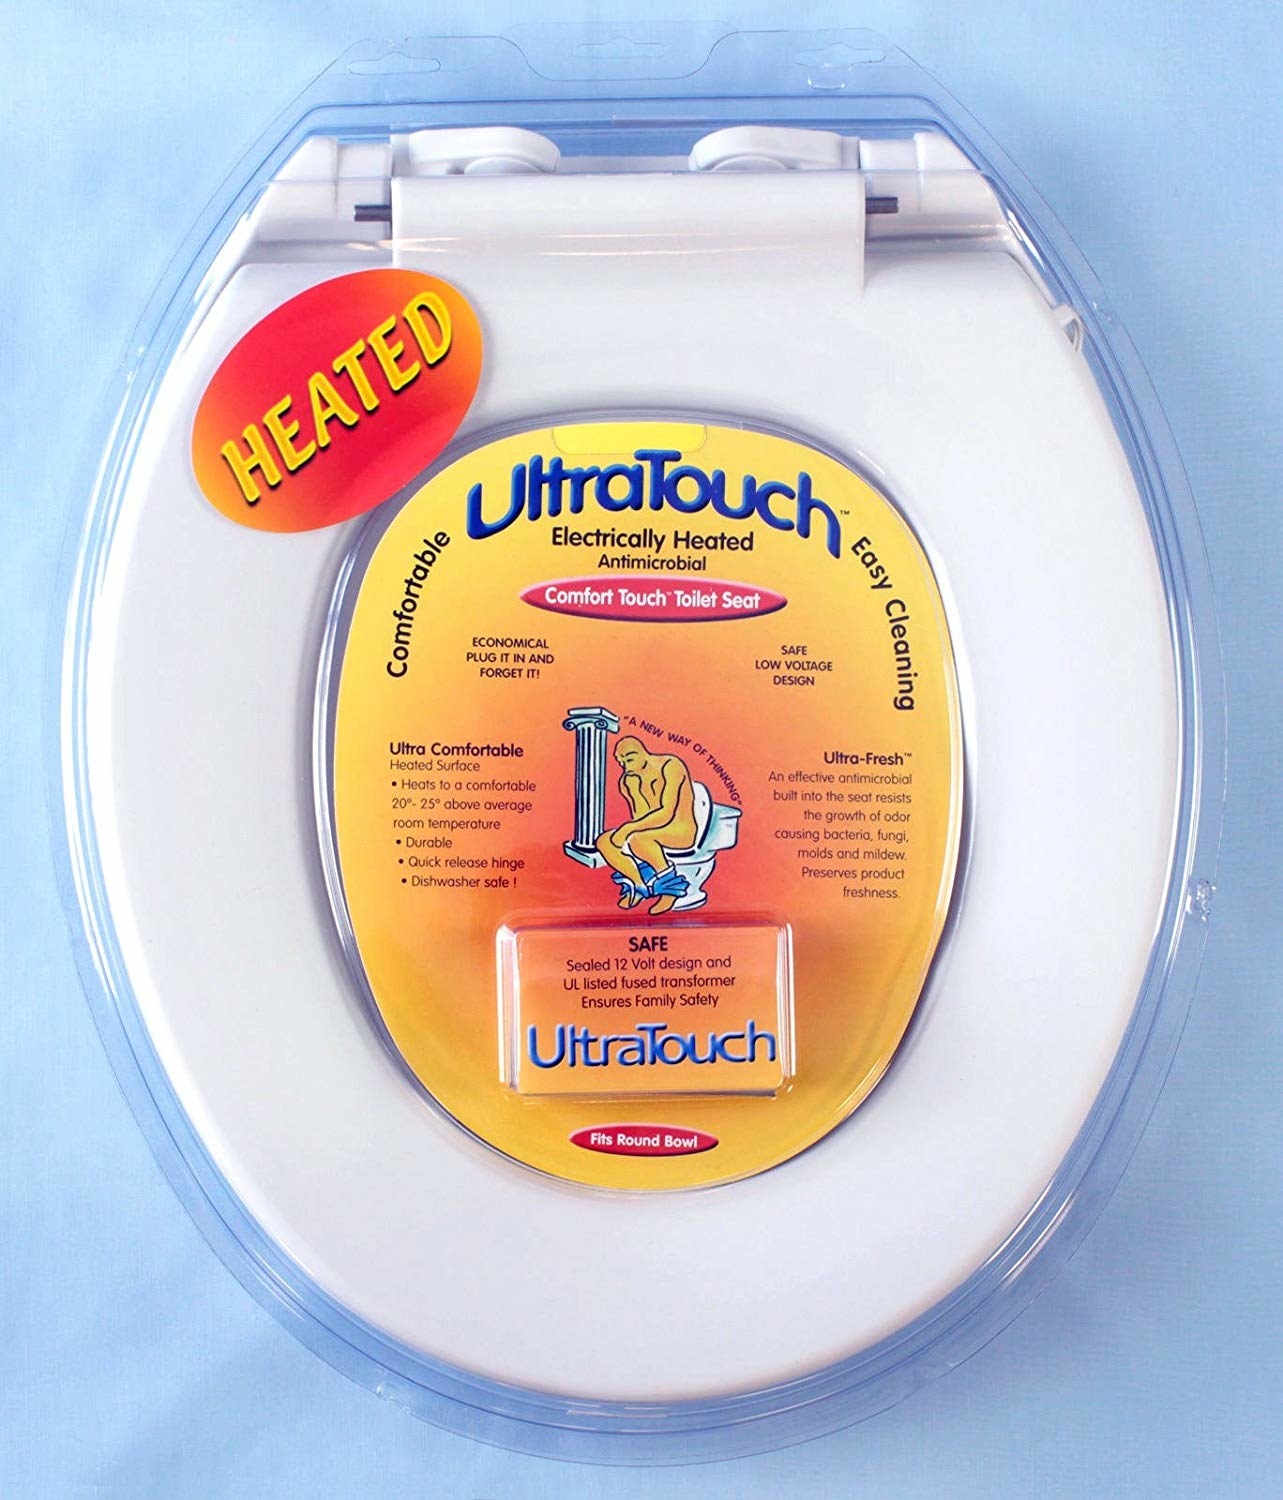 The Ultratouch Electrically Heated Antimicrobial toilet seat